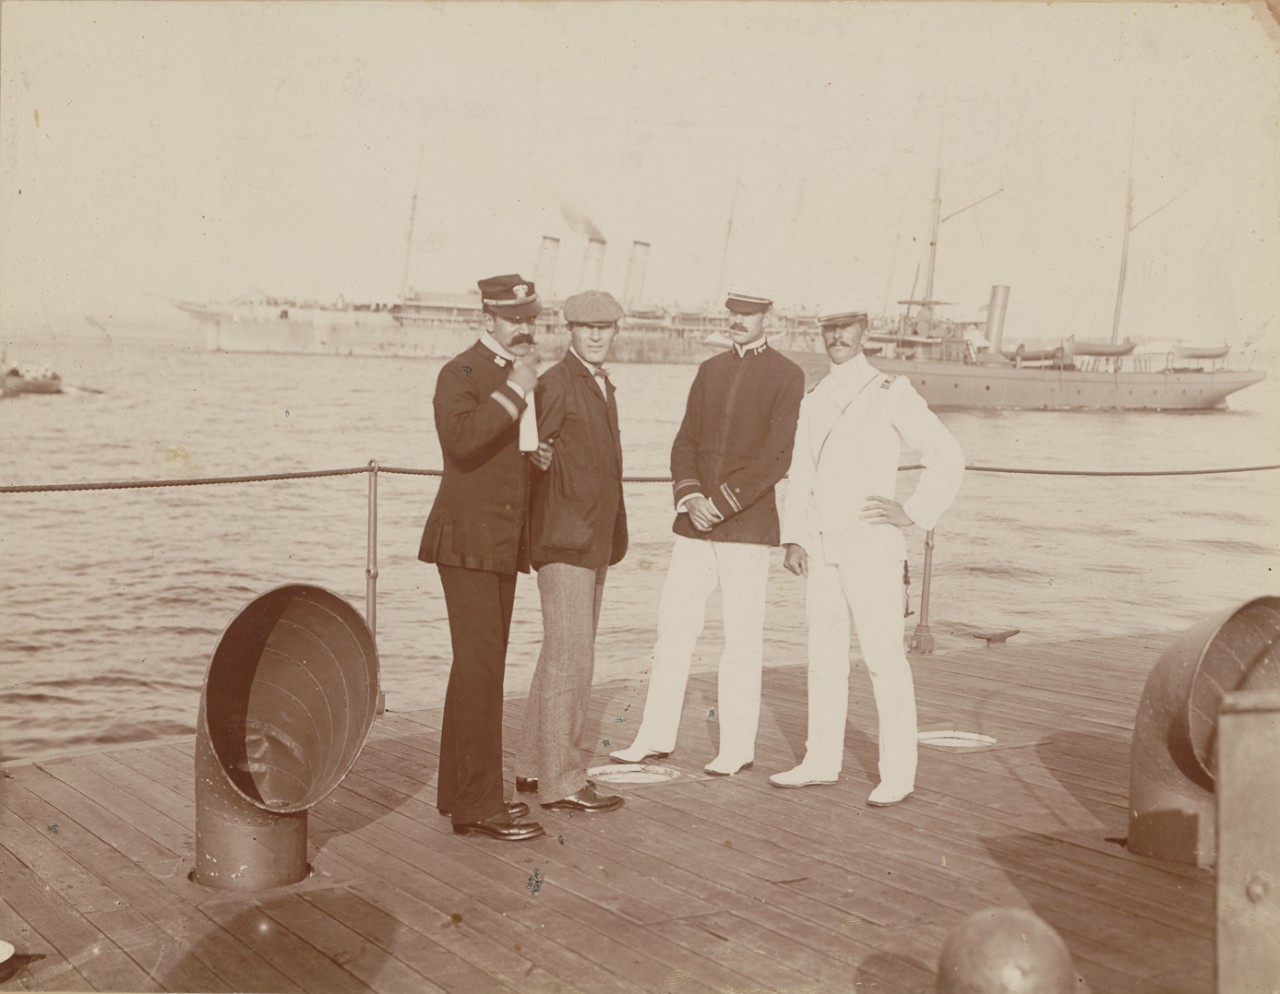 A picture of some New York Militia officers posing on deck.